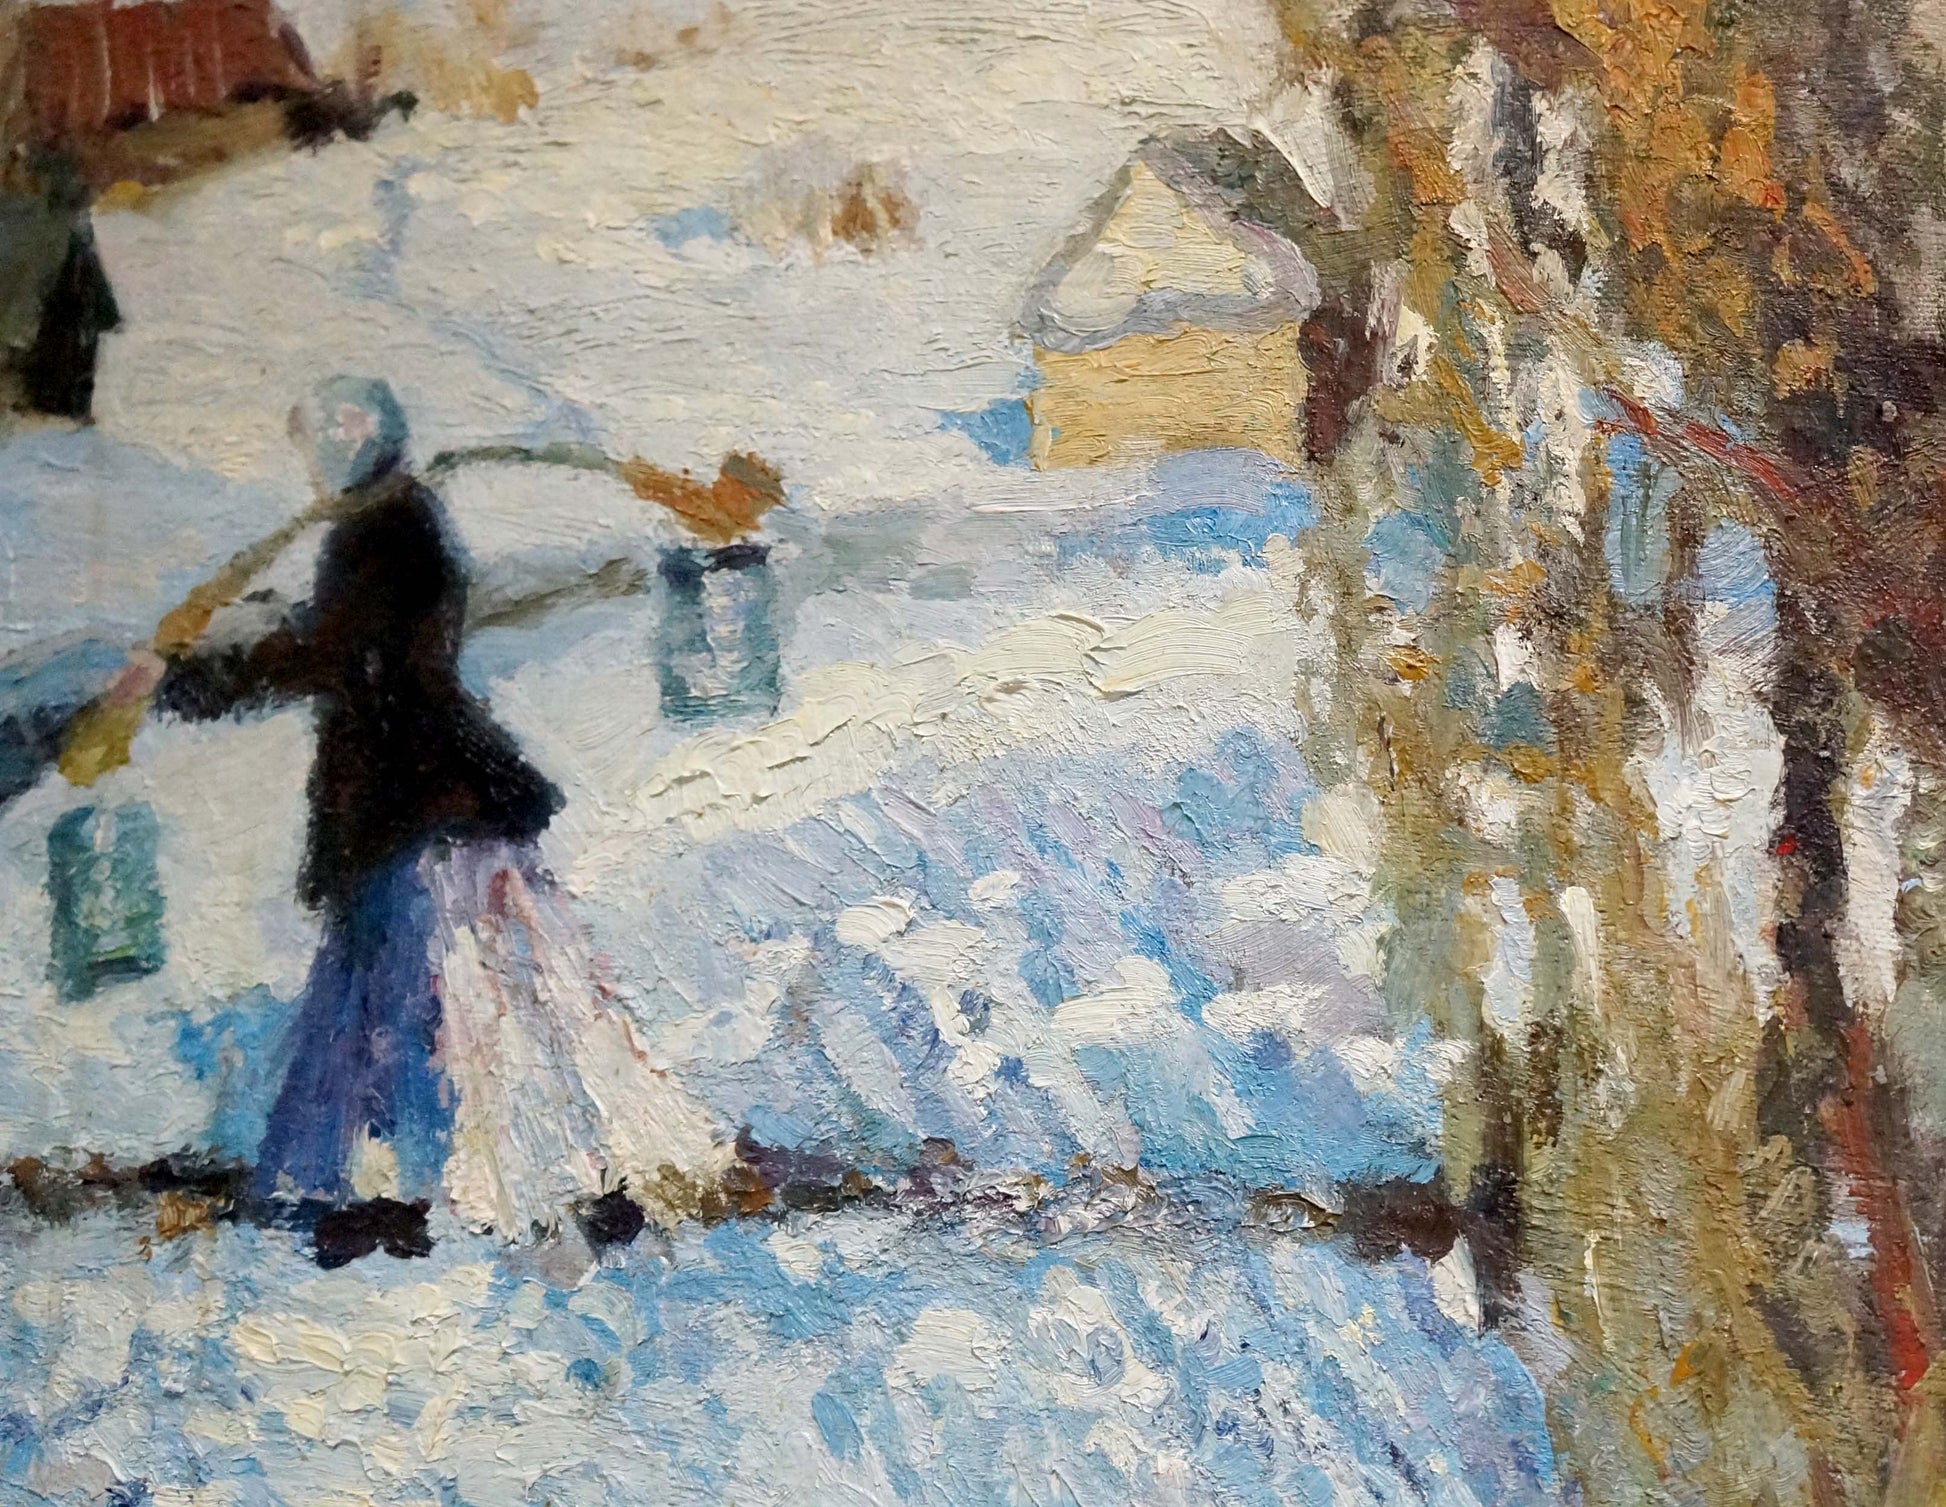 An unknown artist's painting: A Girl Walks to a Well in Winter